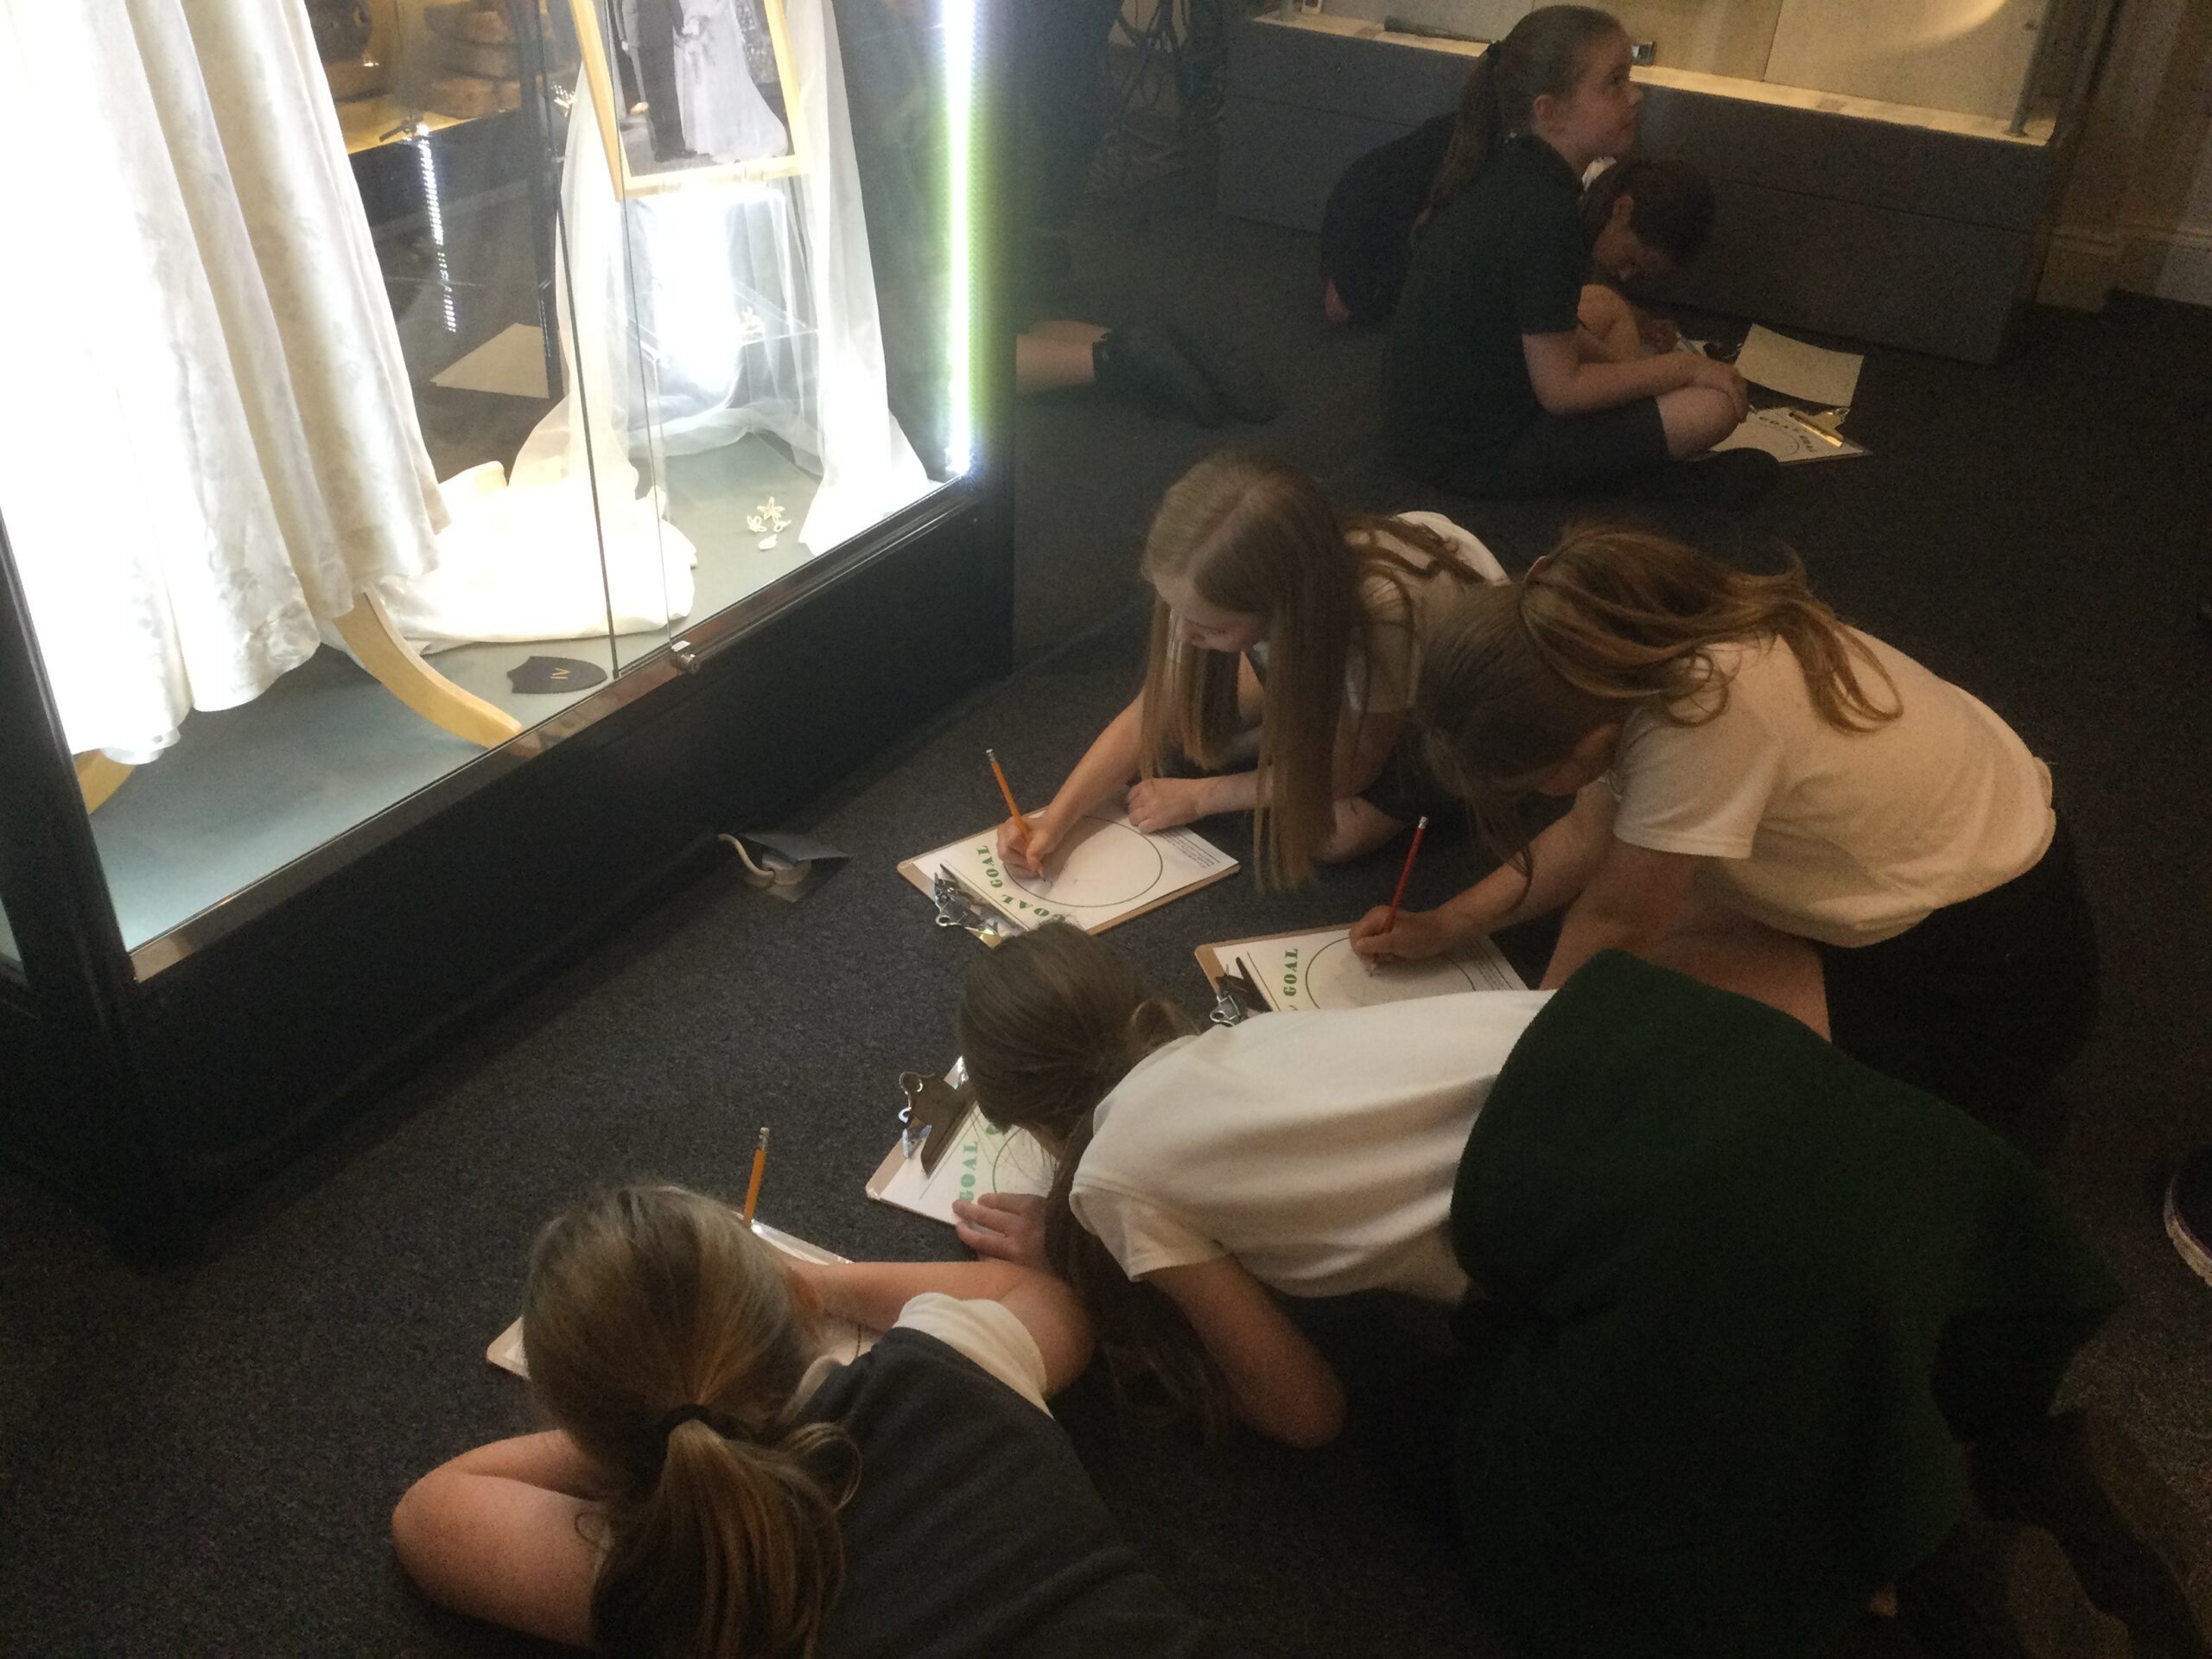 School children crouched down on the floor drawing an exhibit in a well-lit display case